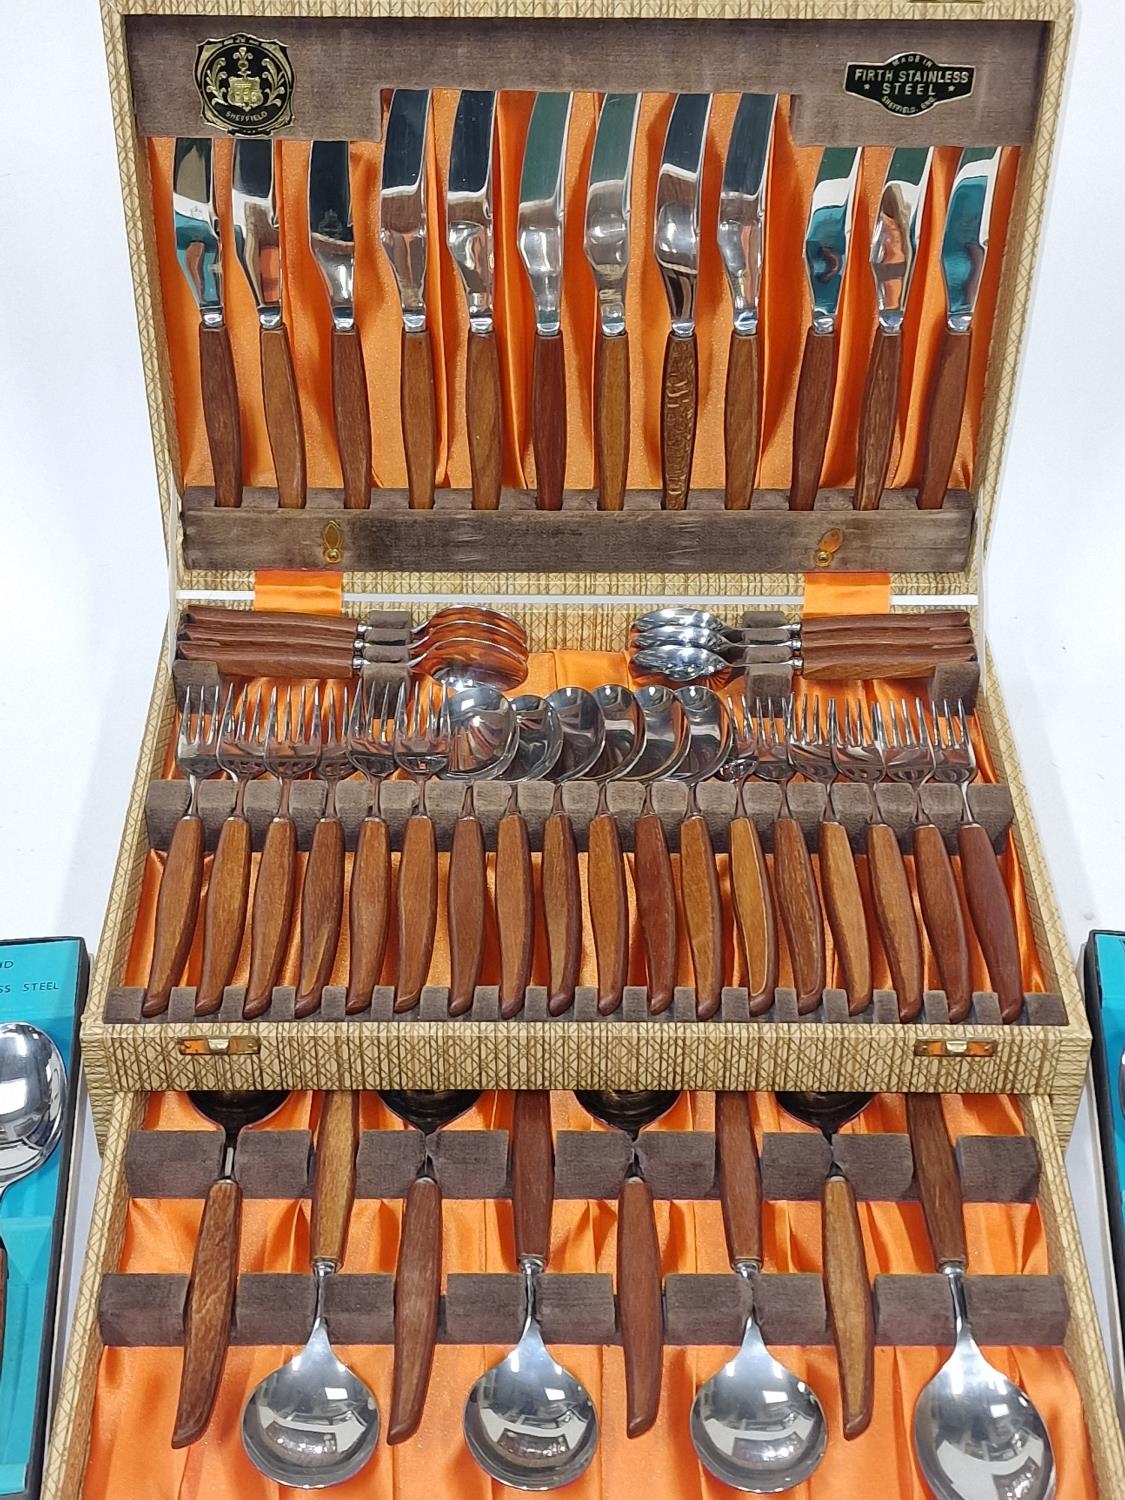 Firth Stainless Steel Sheffield complete 1970's canteen of wooden handled canteen of cutlery - Image 2 of 4